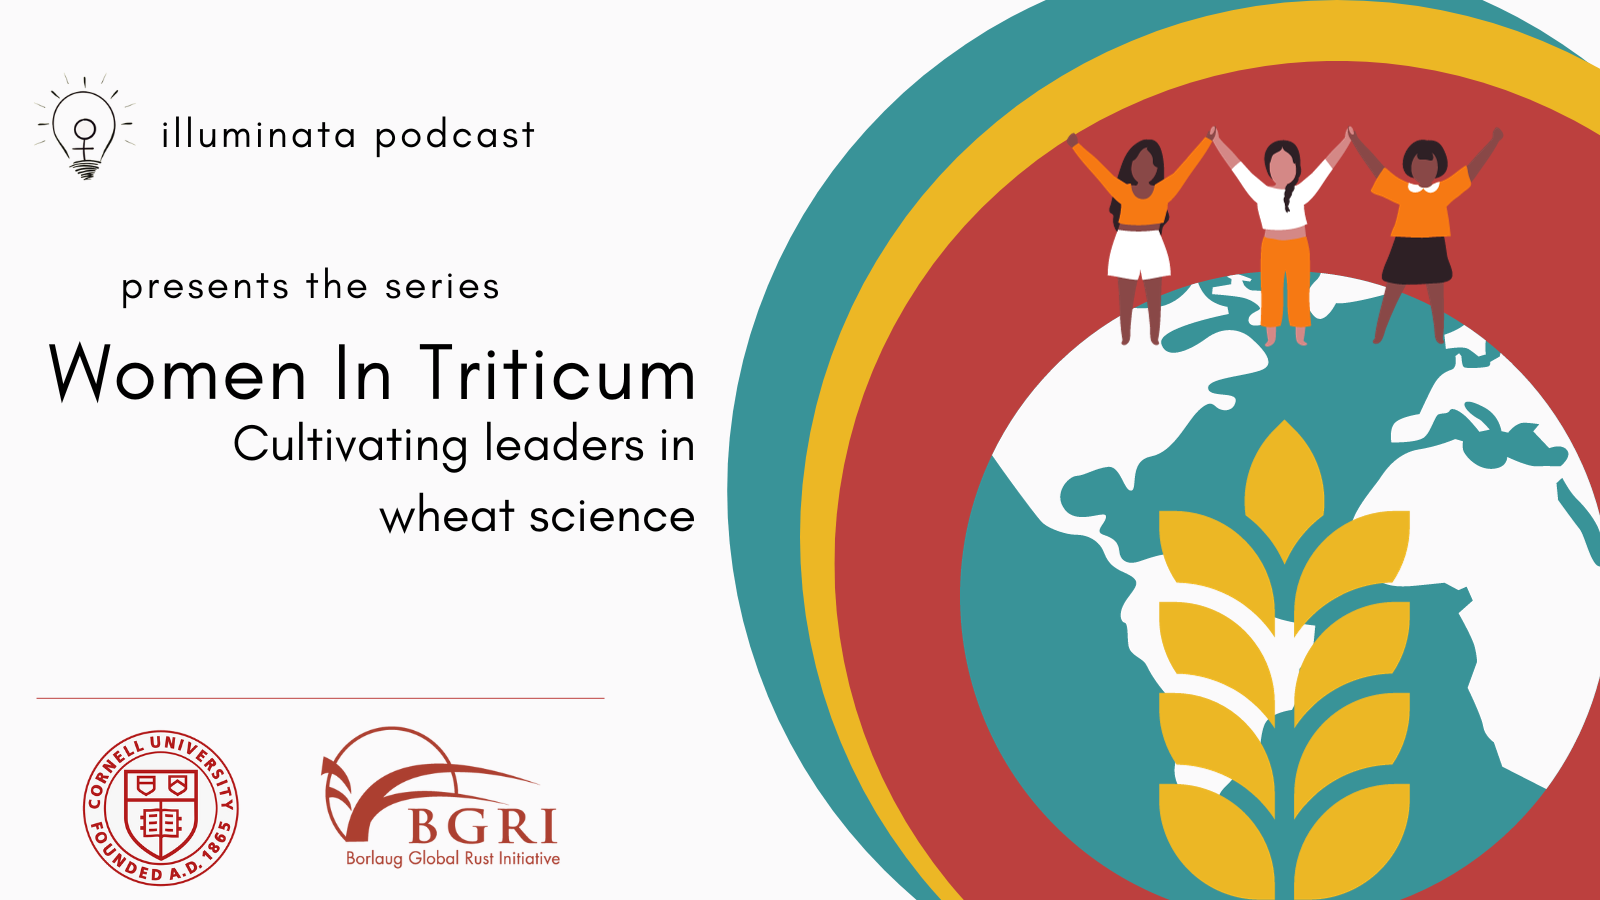 Illuminata podcast presents the series Women in Triticum cultivating leaders in wheat science